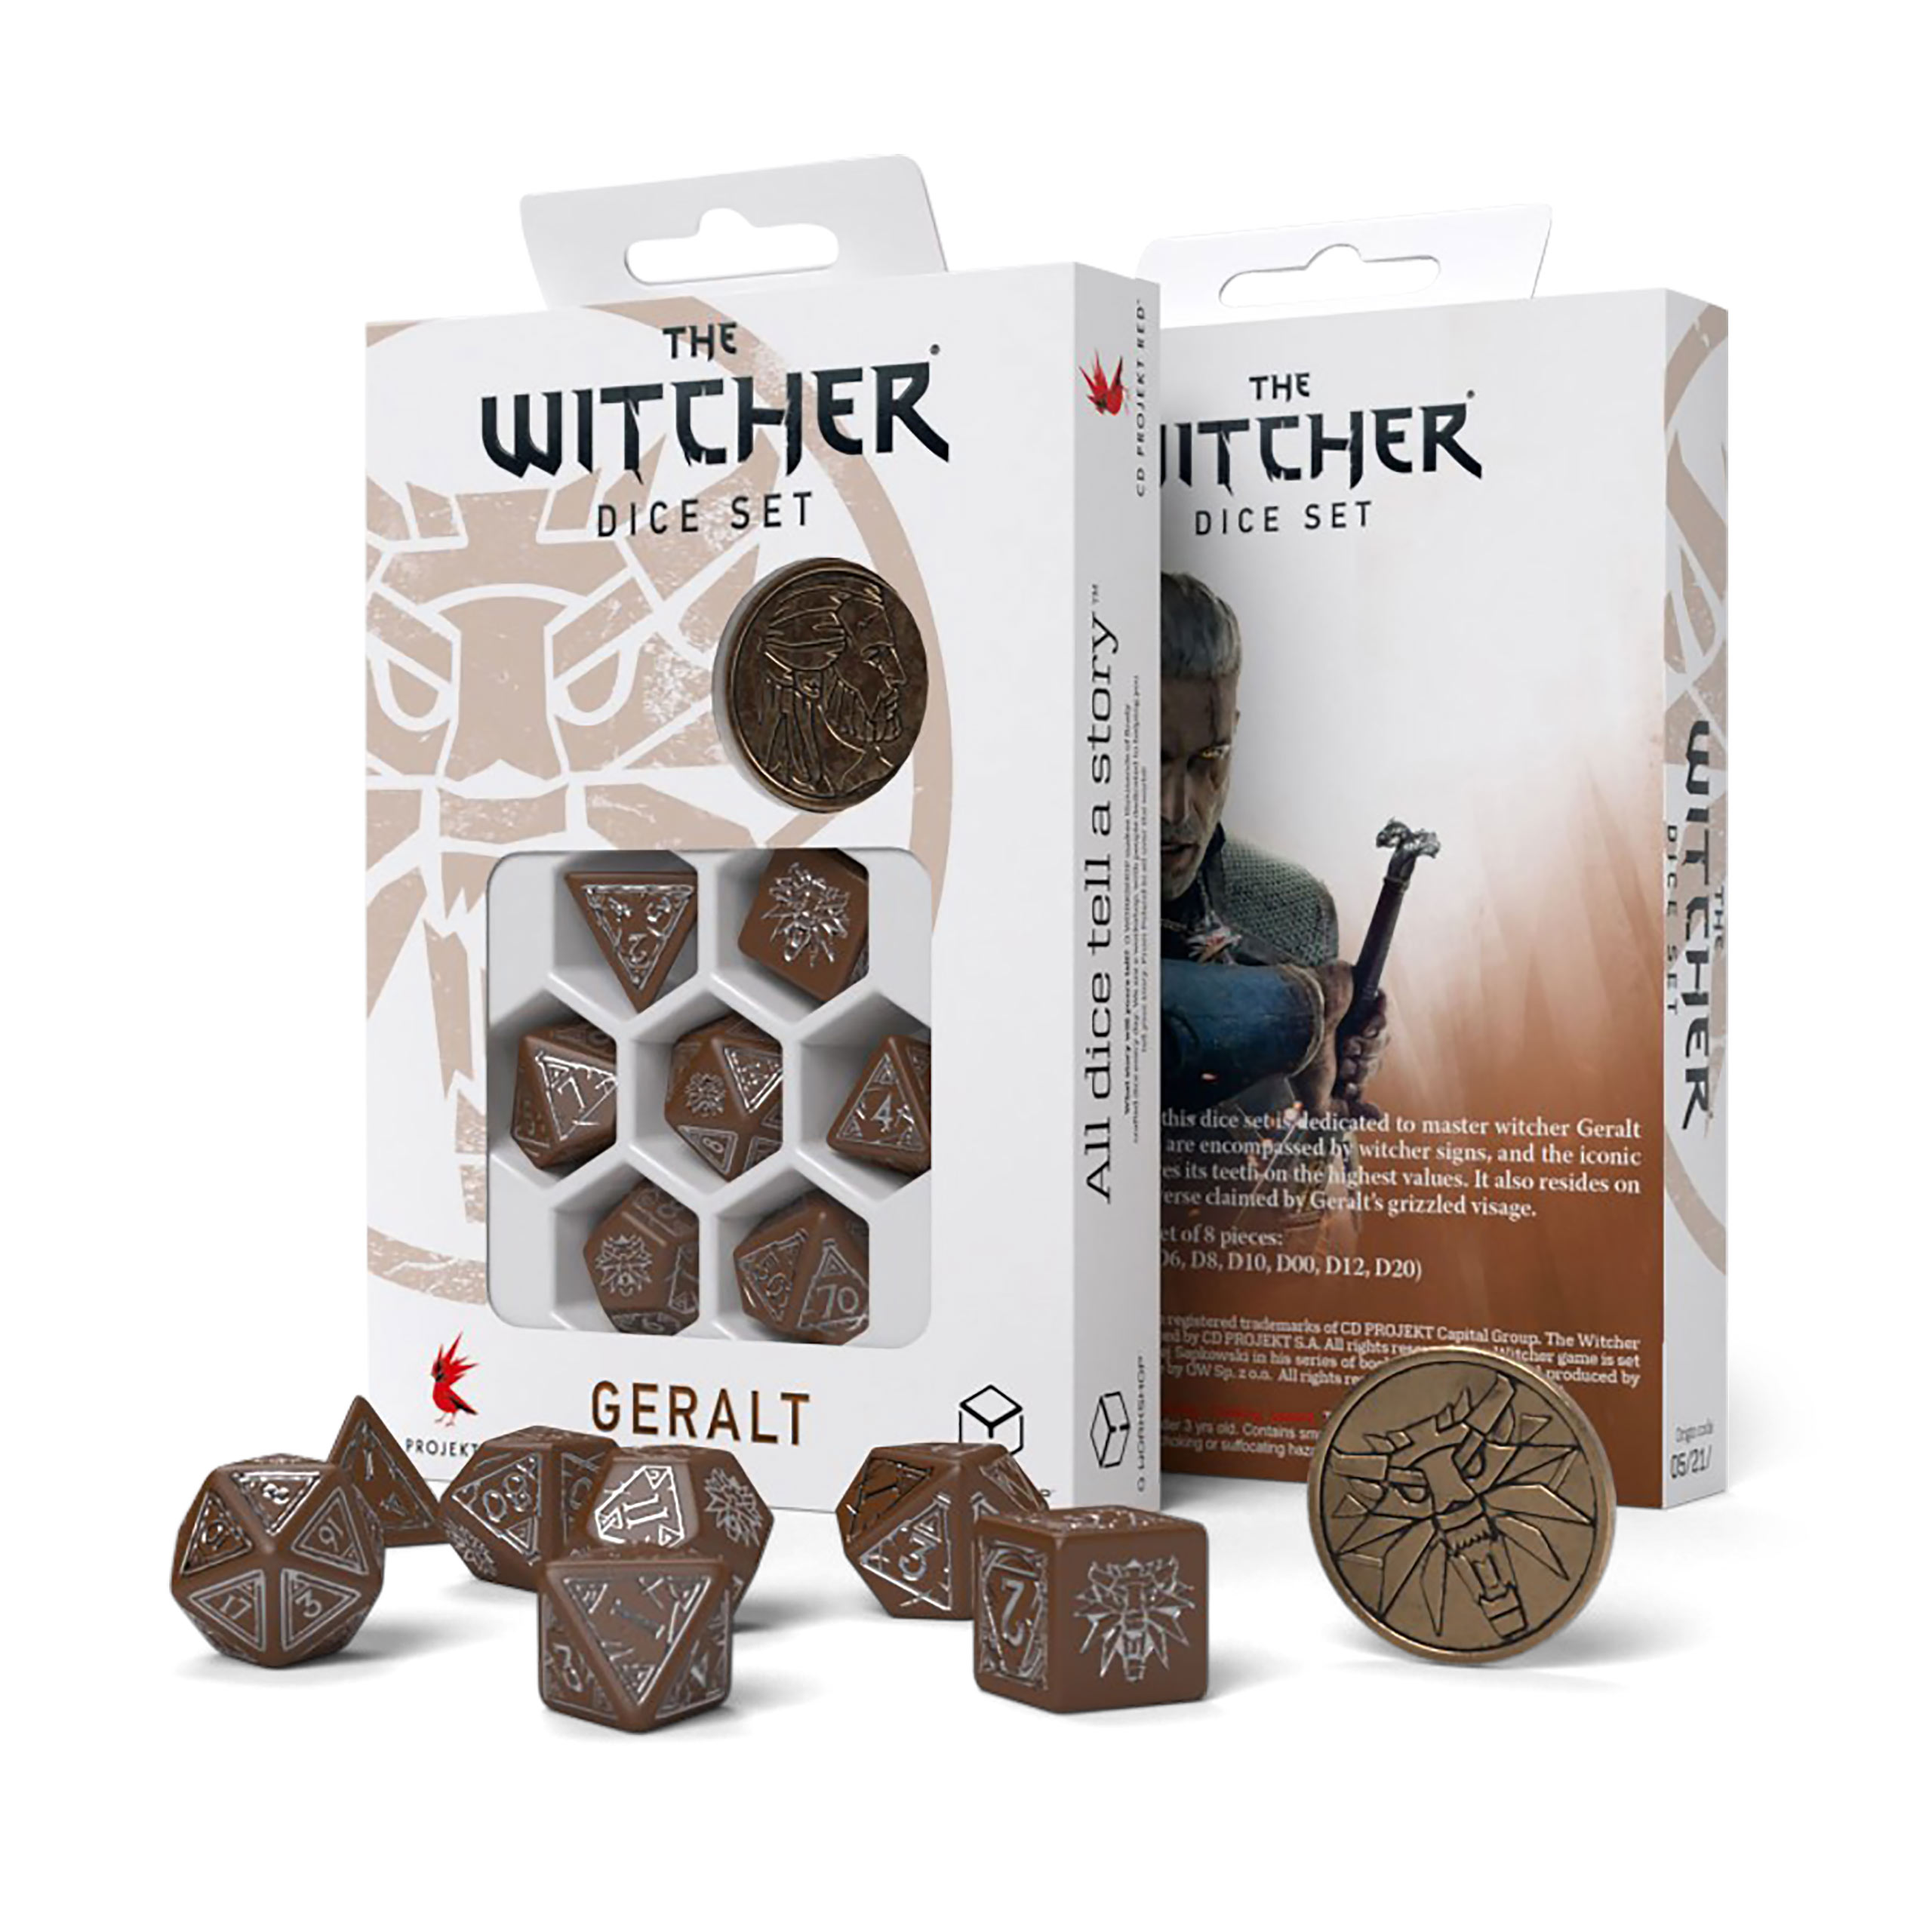 Witcher - Geralt Roach's Companion RPG Dice Set 7pc with Collector's Coin